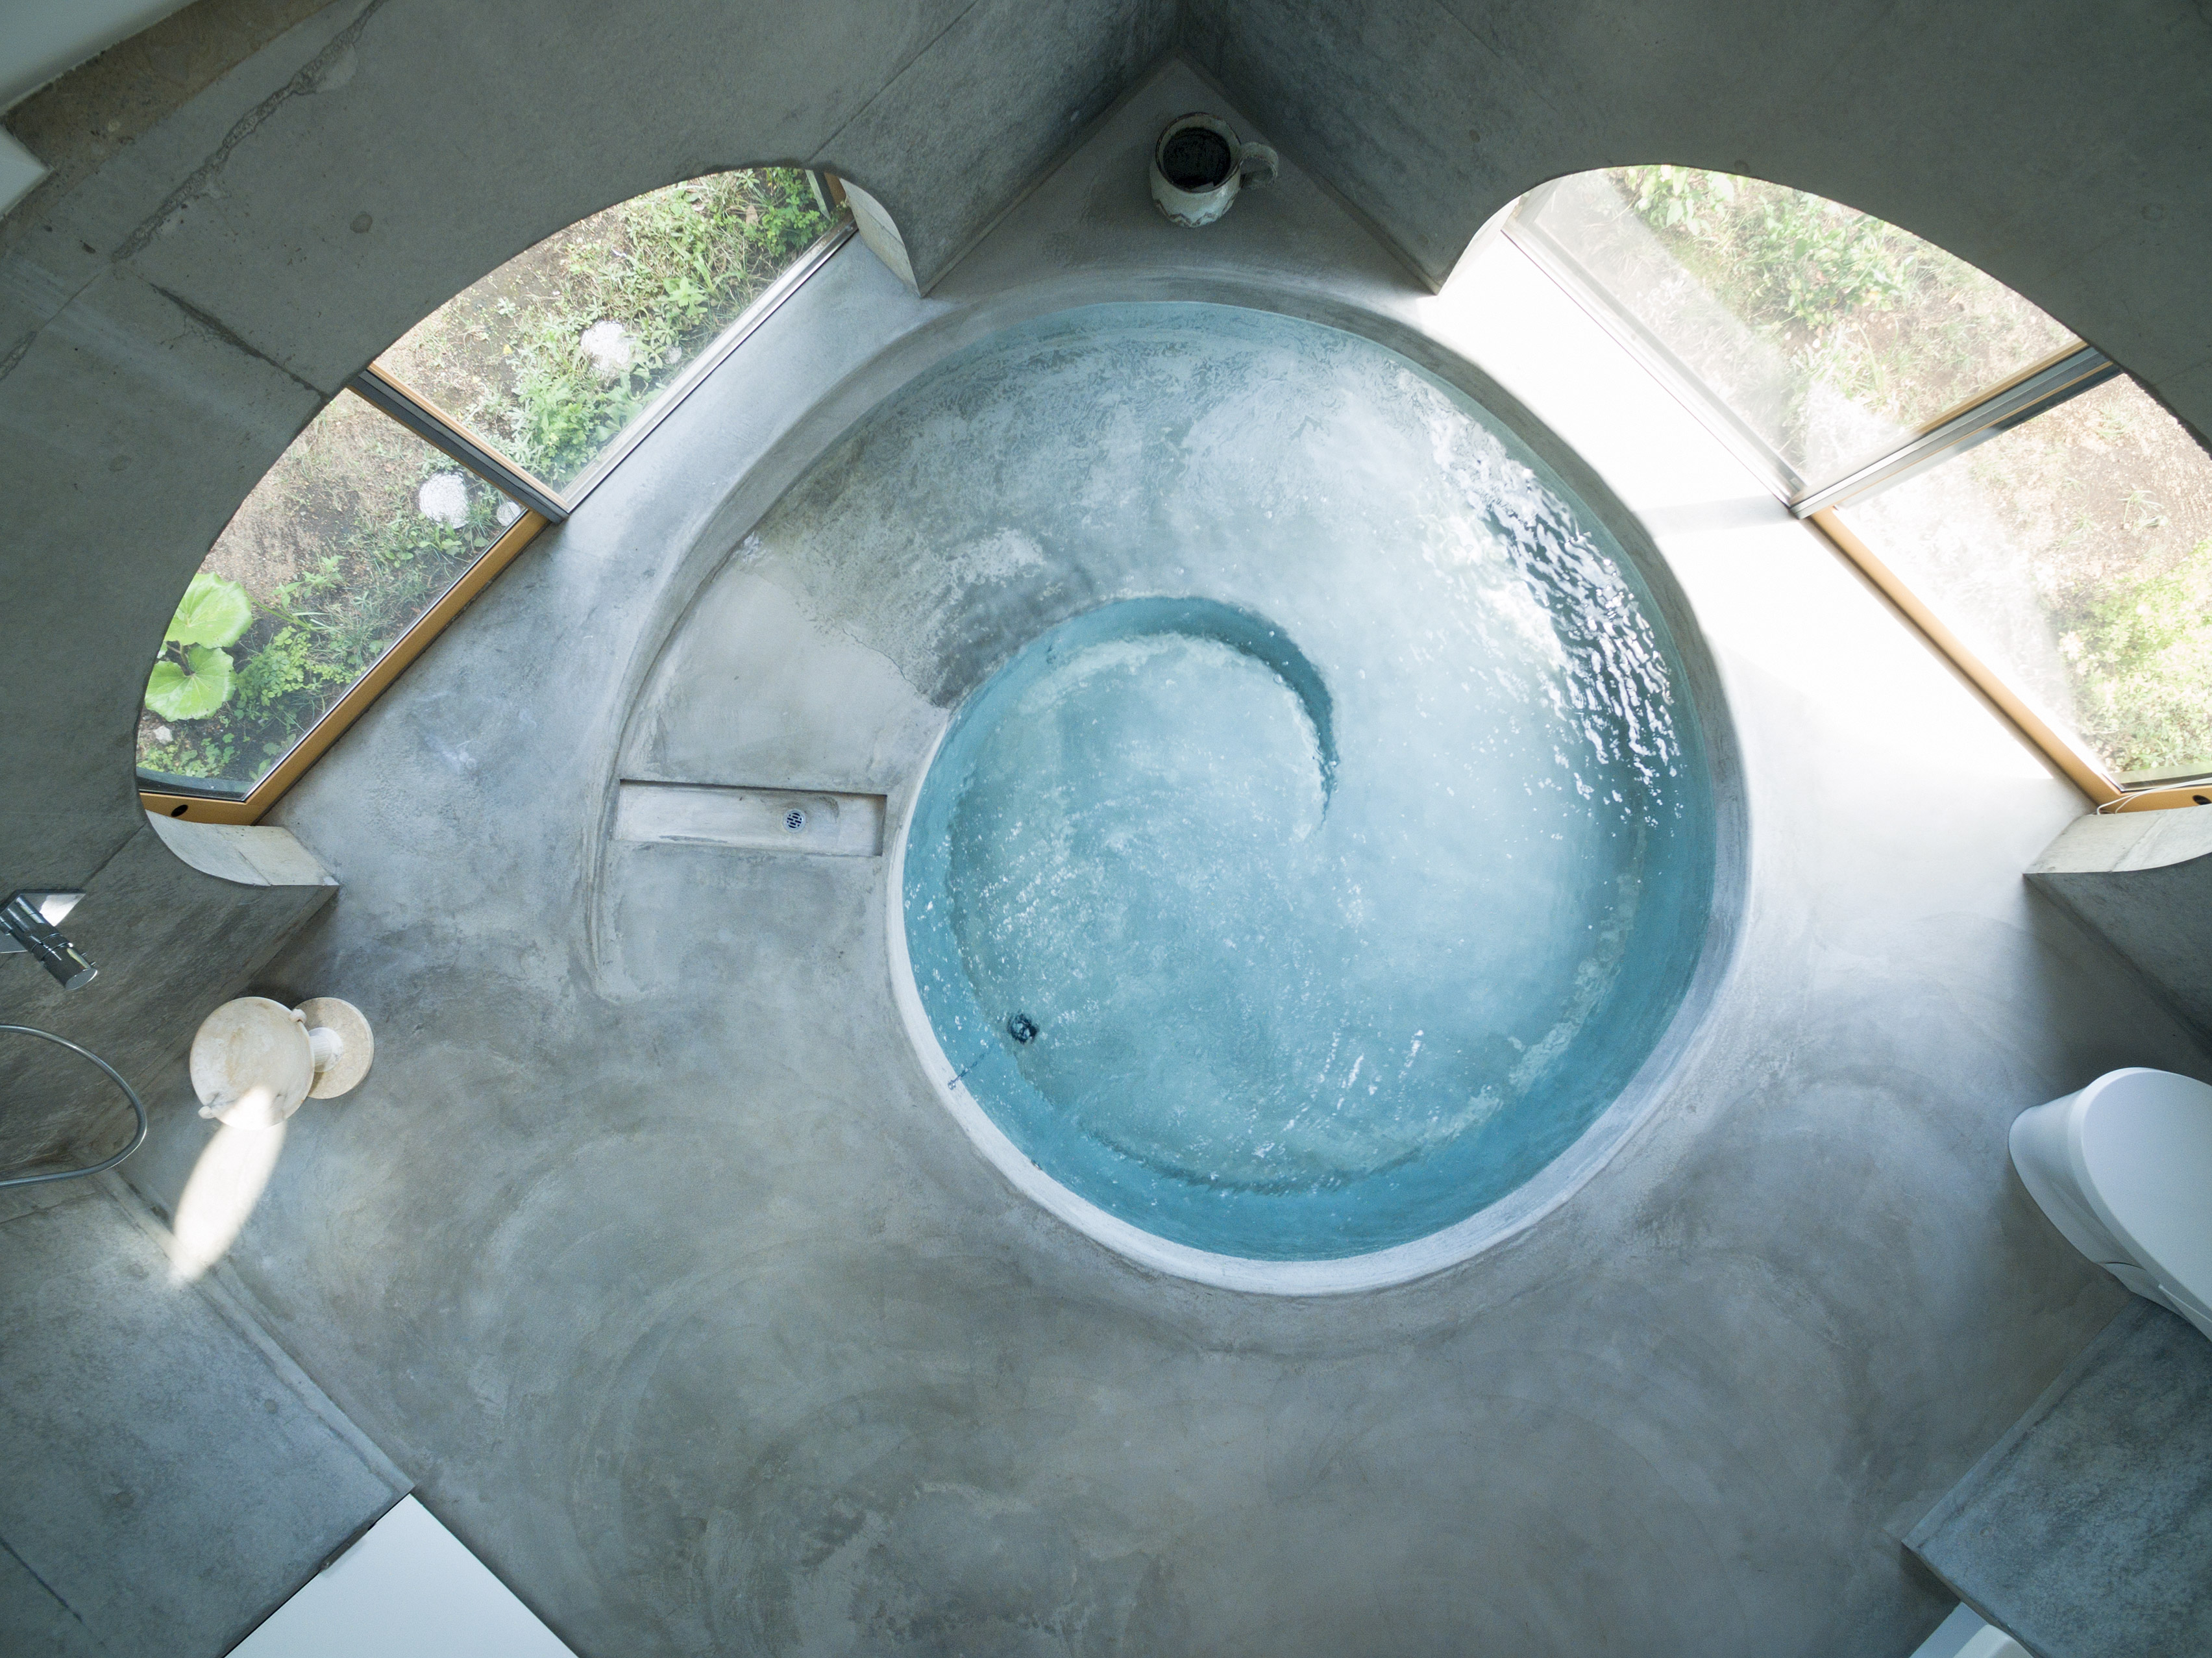 Teepee-shaped Jikka complex by Issei Suma features community kitchen and spiral-shaped pool